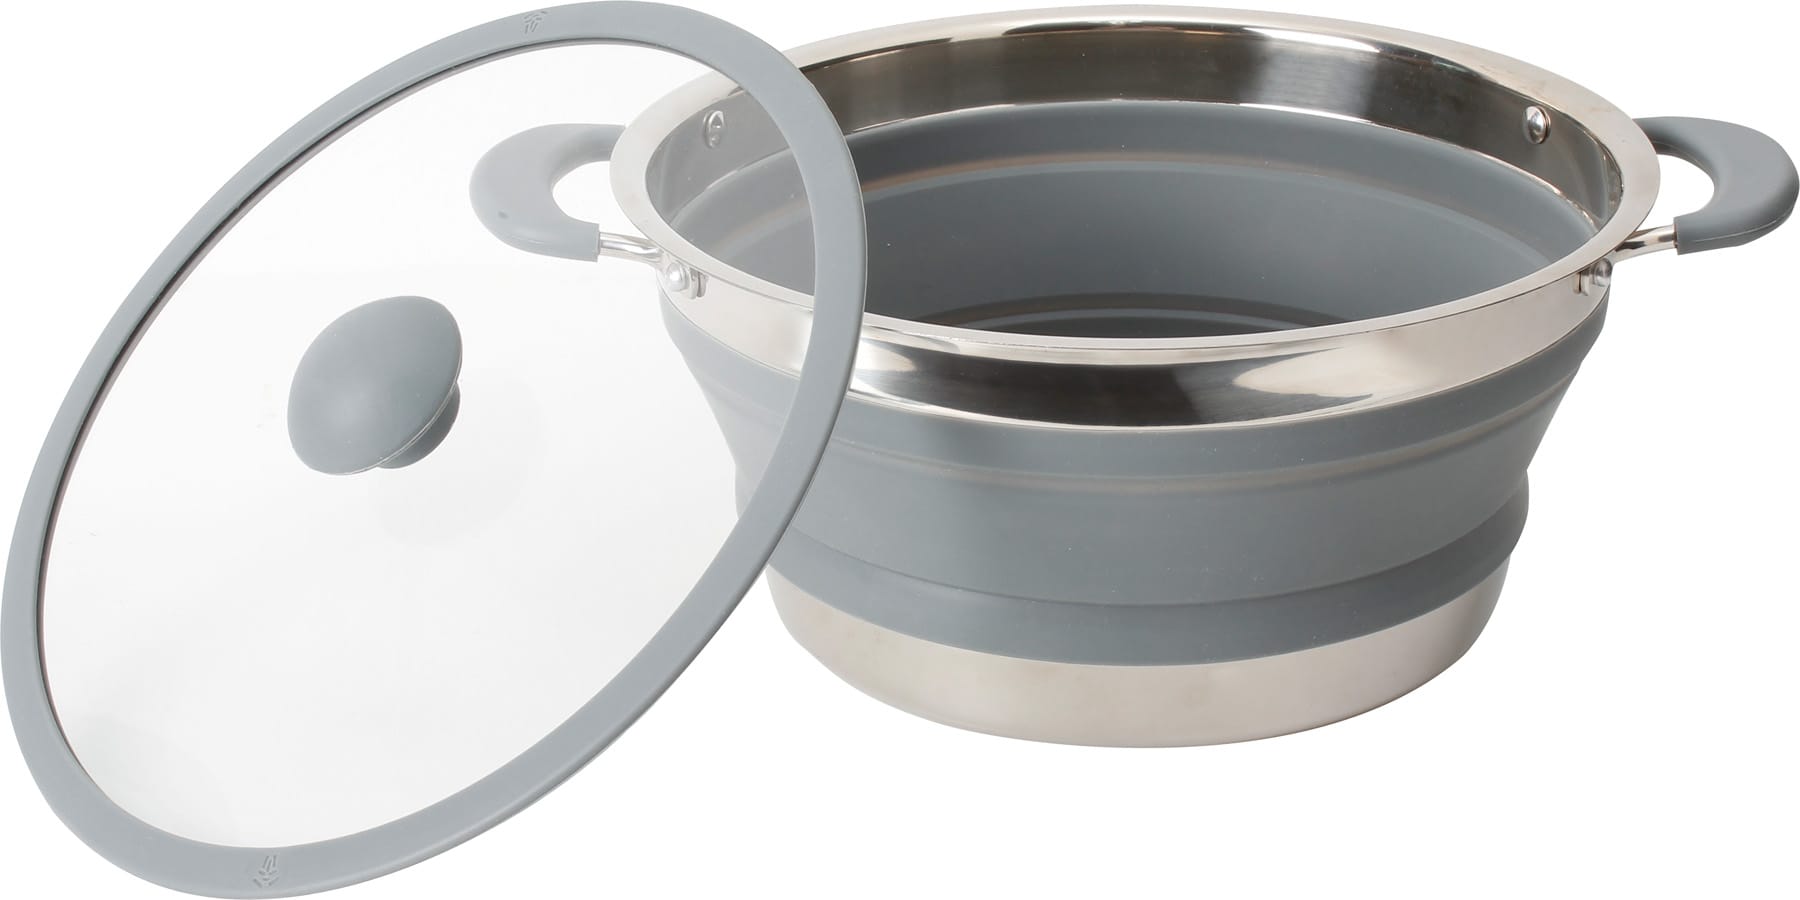 Brunner Volcano Collapsible Silicon Saucepans